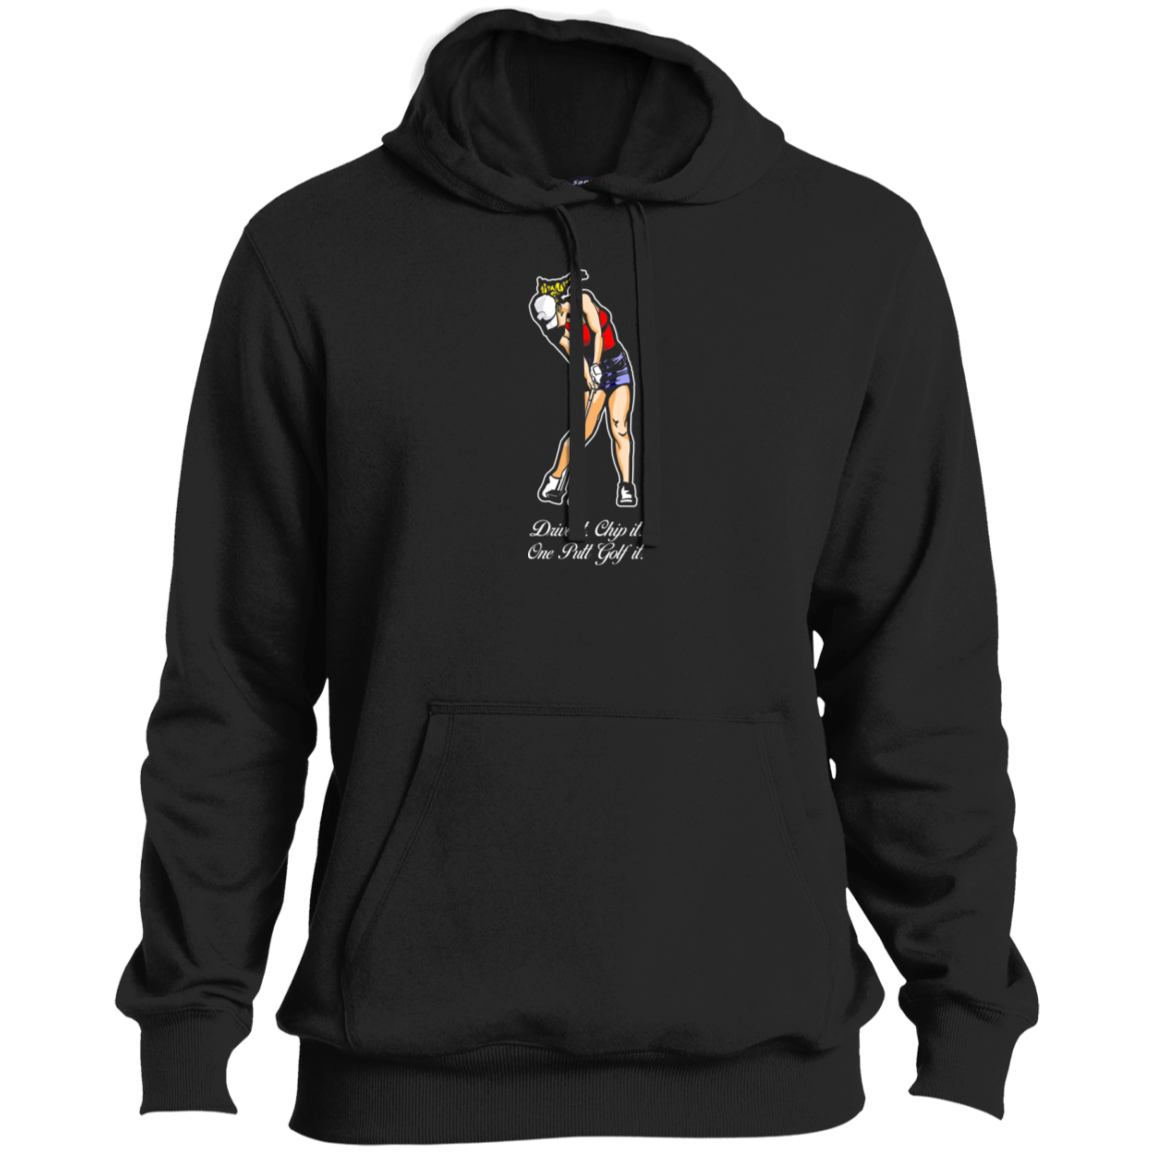 OPG Custom Design #9. Drive it. Chip it. One Putt Golf It. Golf So. Cal. Tall Pullover Hoodie